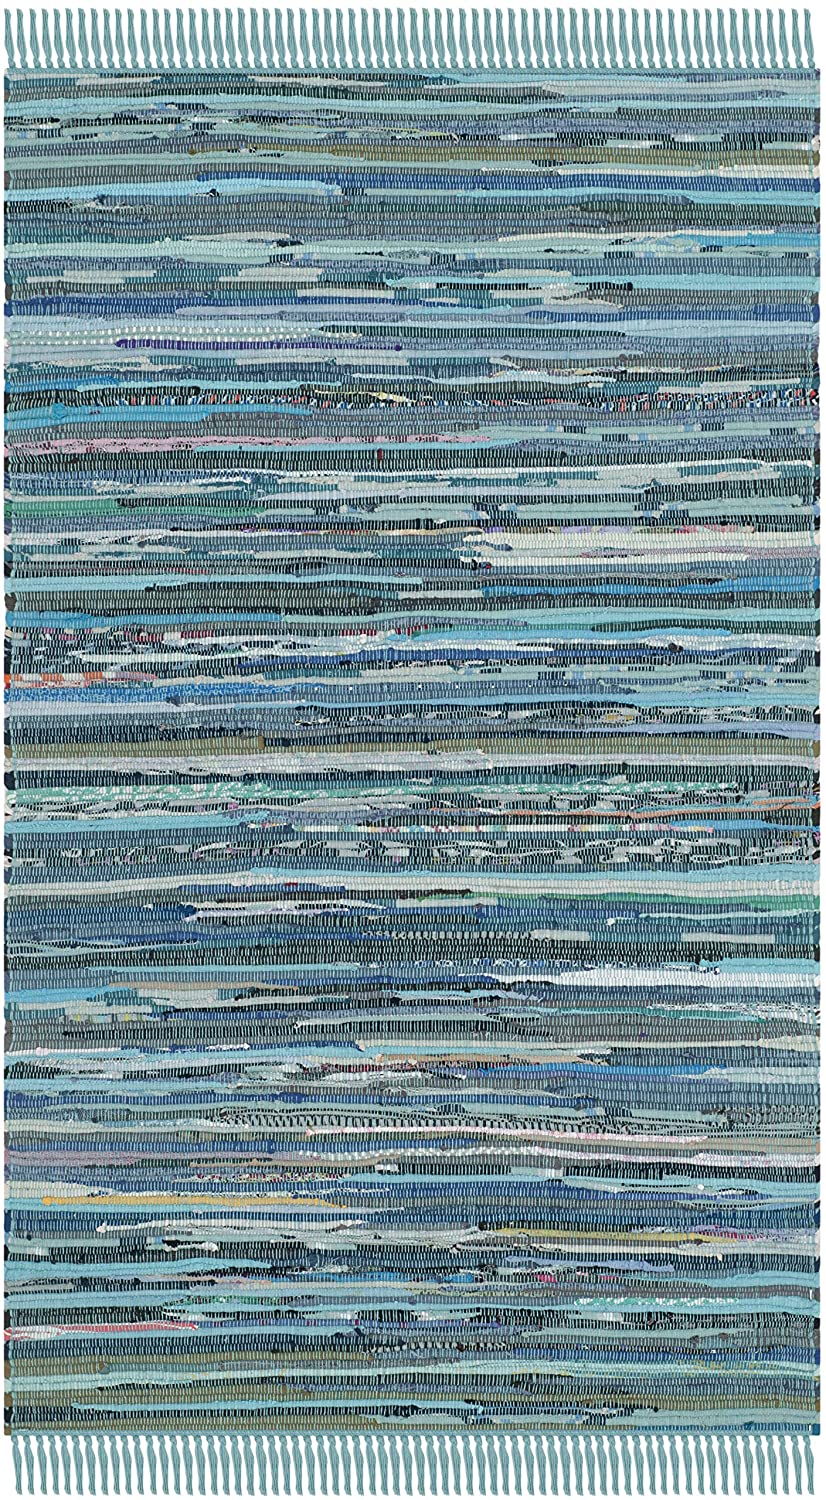 Hand Woven Blue and Multi Cotton Area Rug